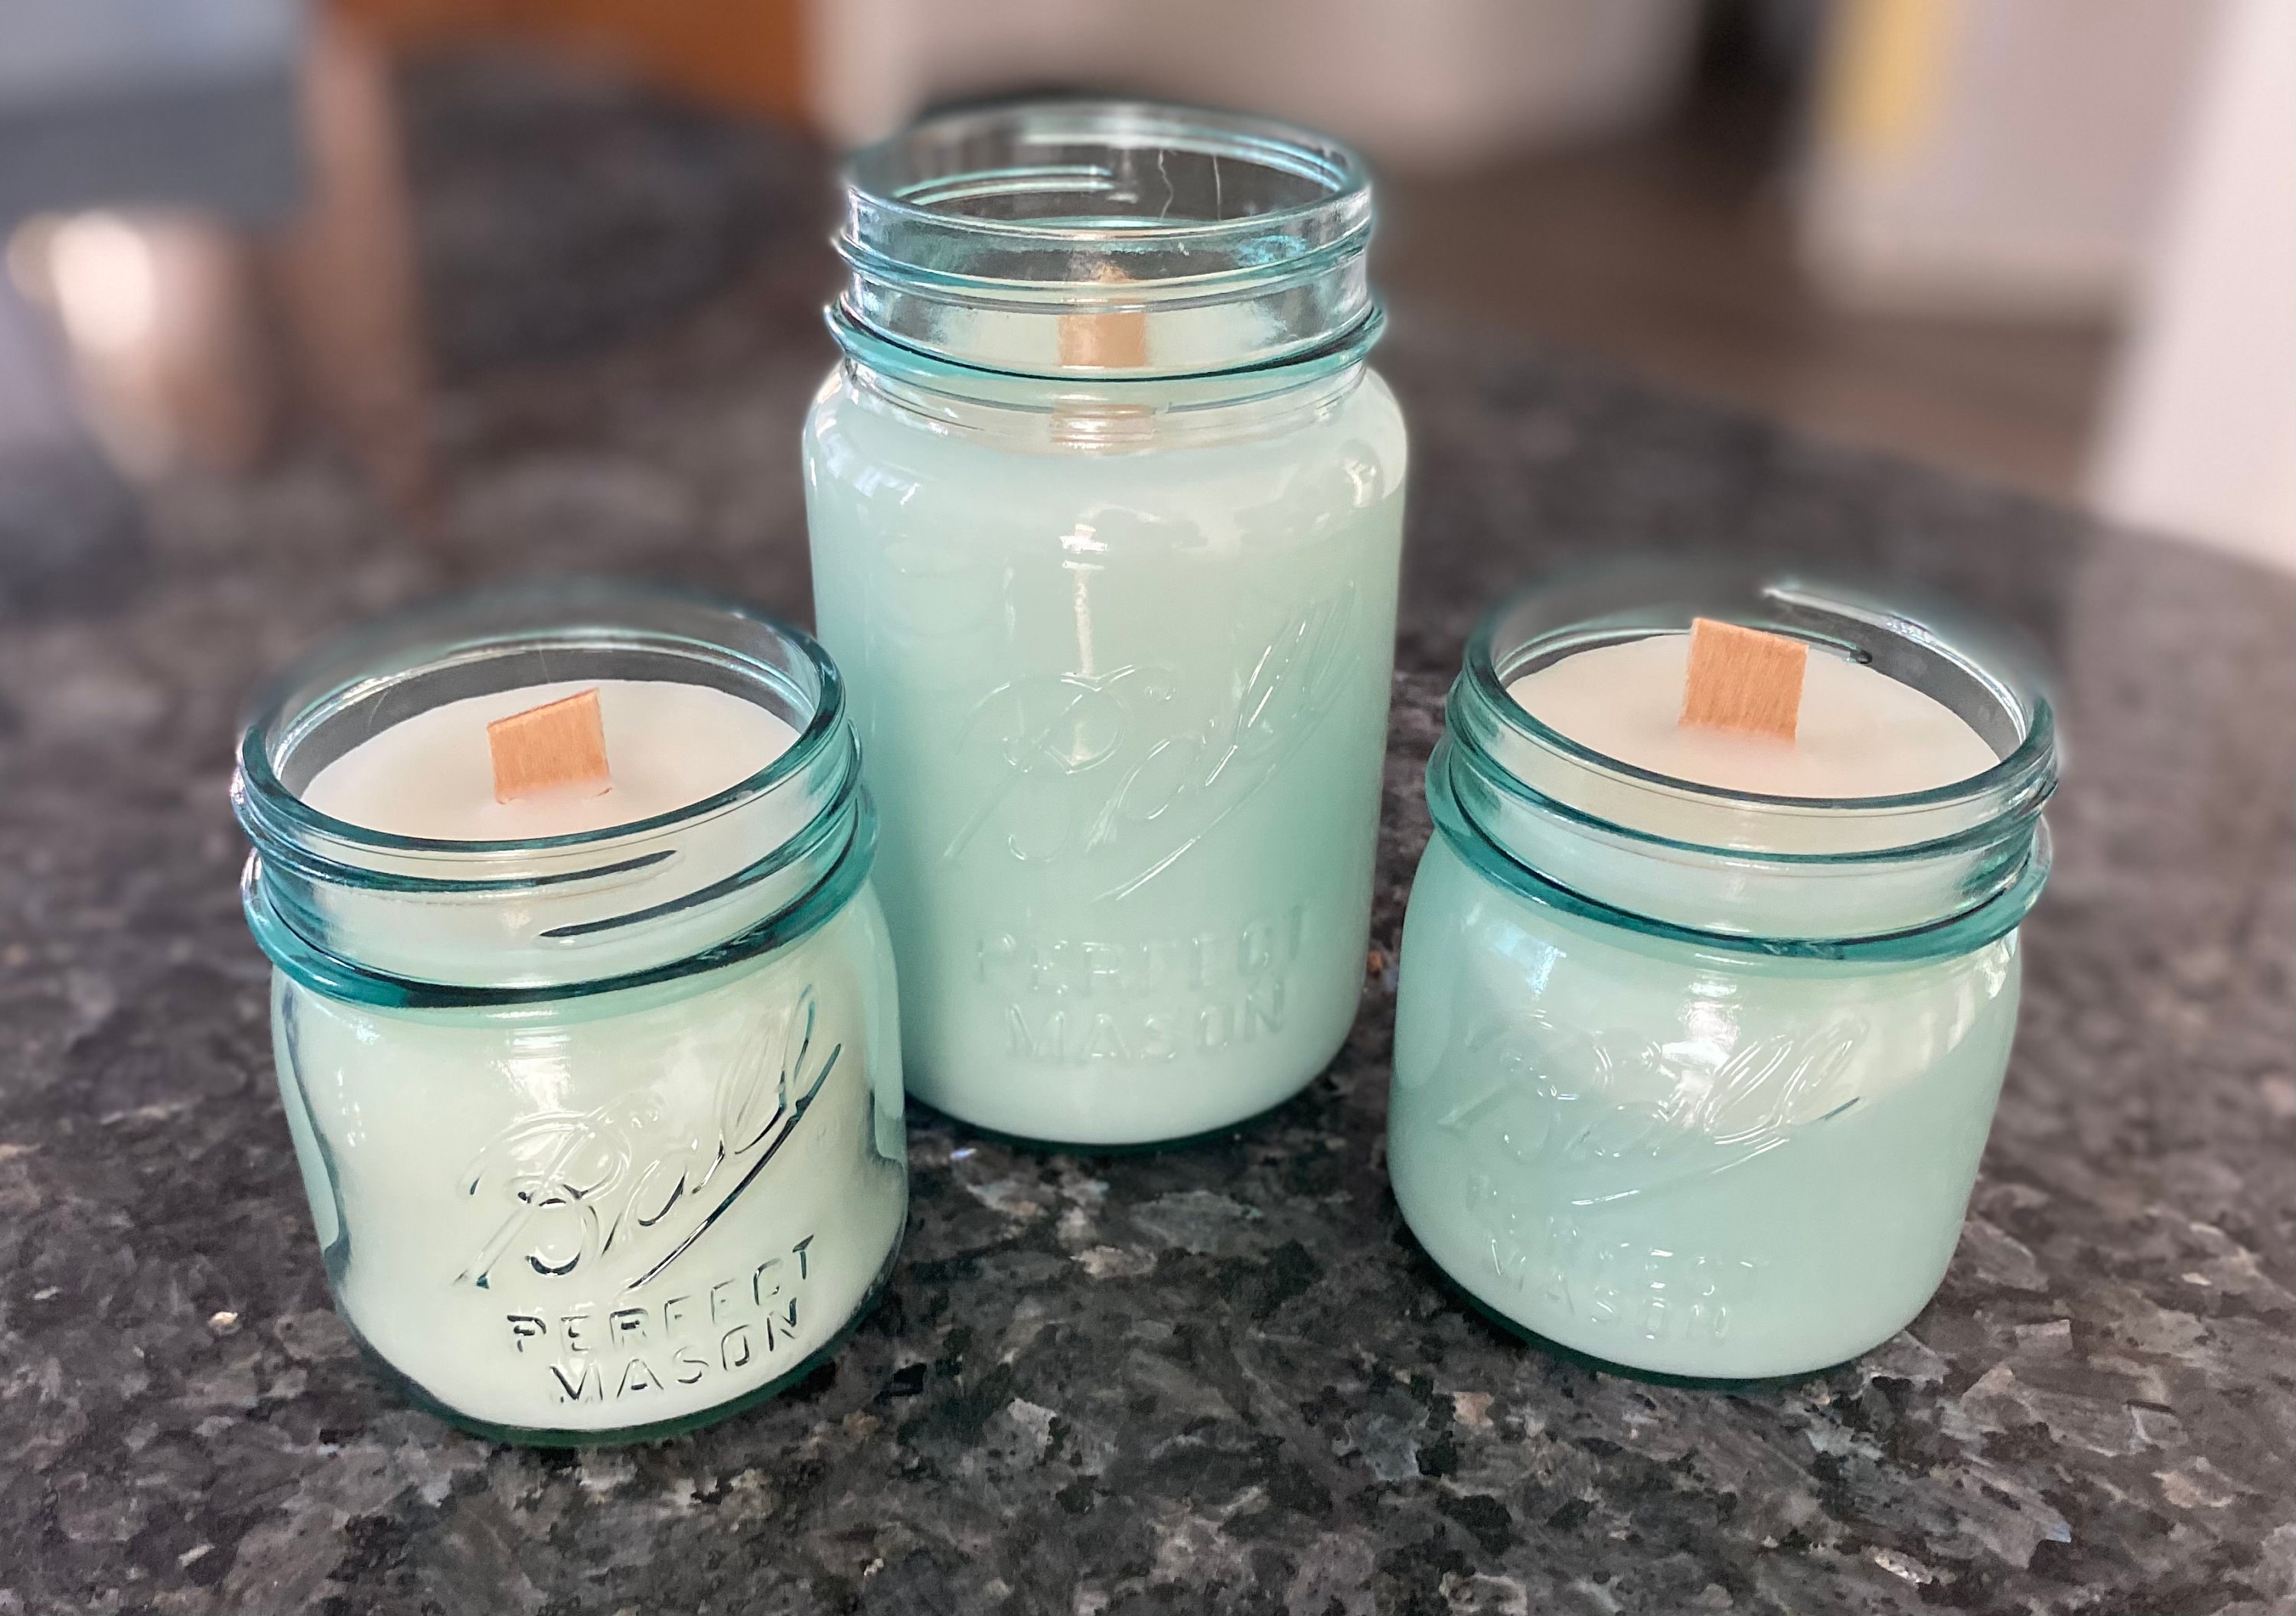 8 oz. Smooth Mason Jars with Pewter Lids - Nature's Garden Candles